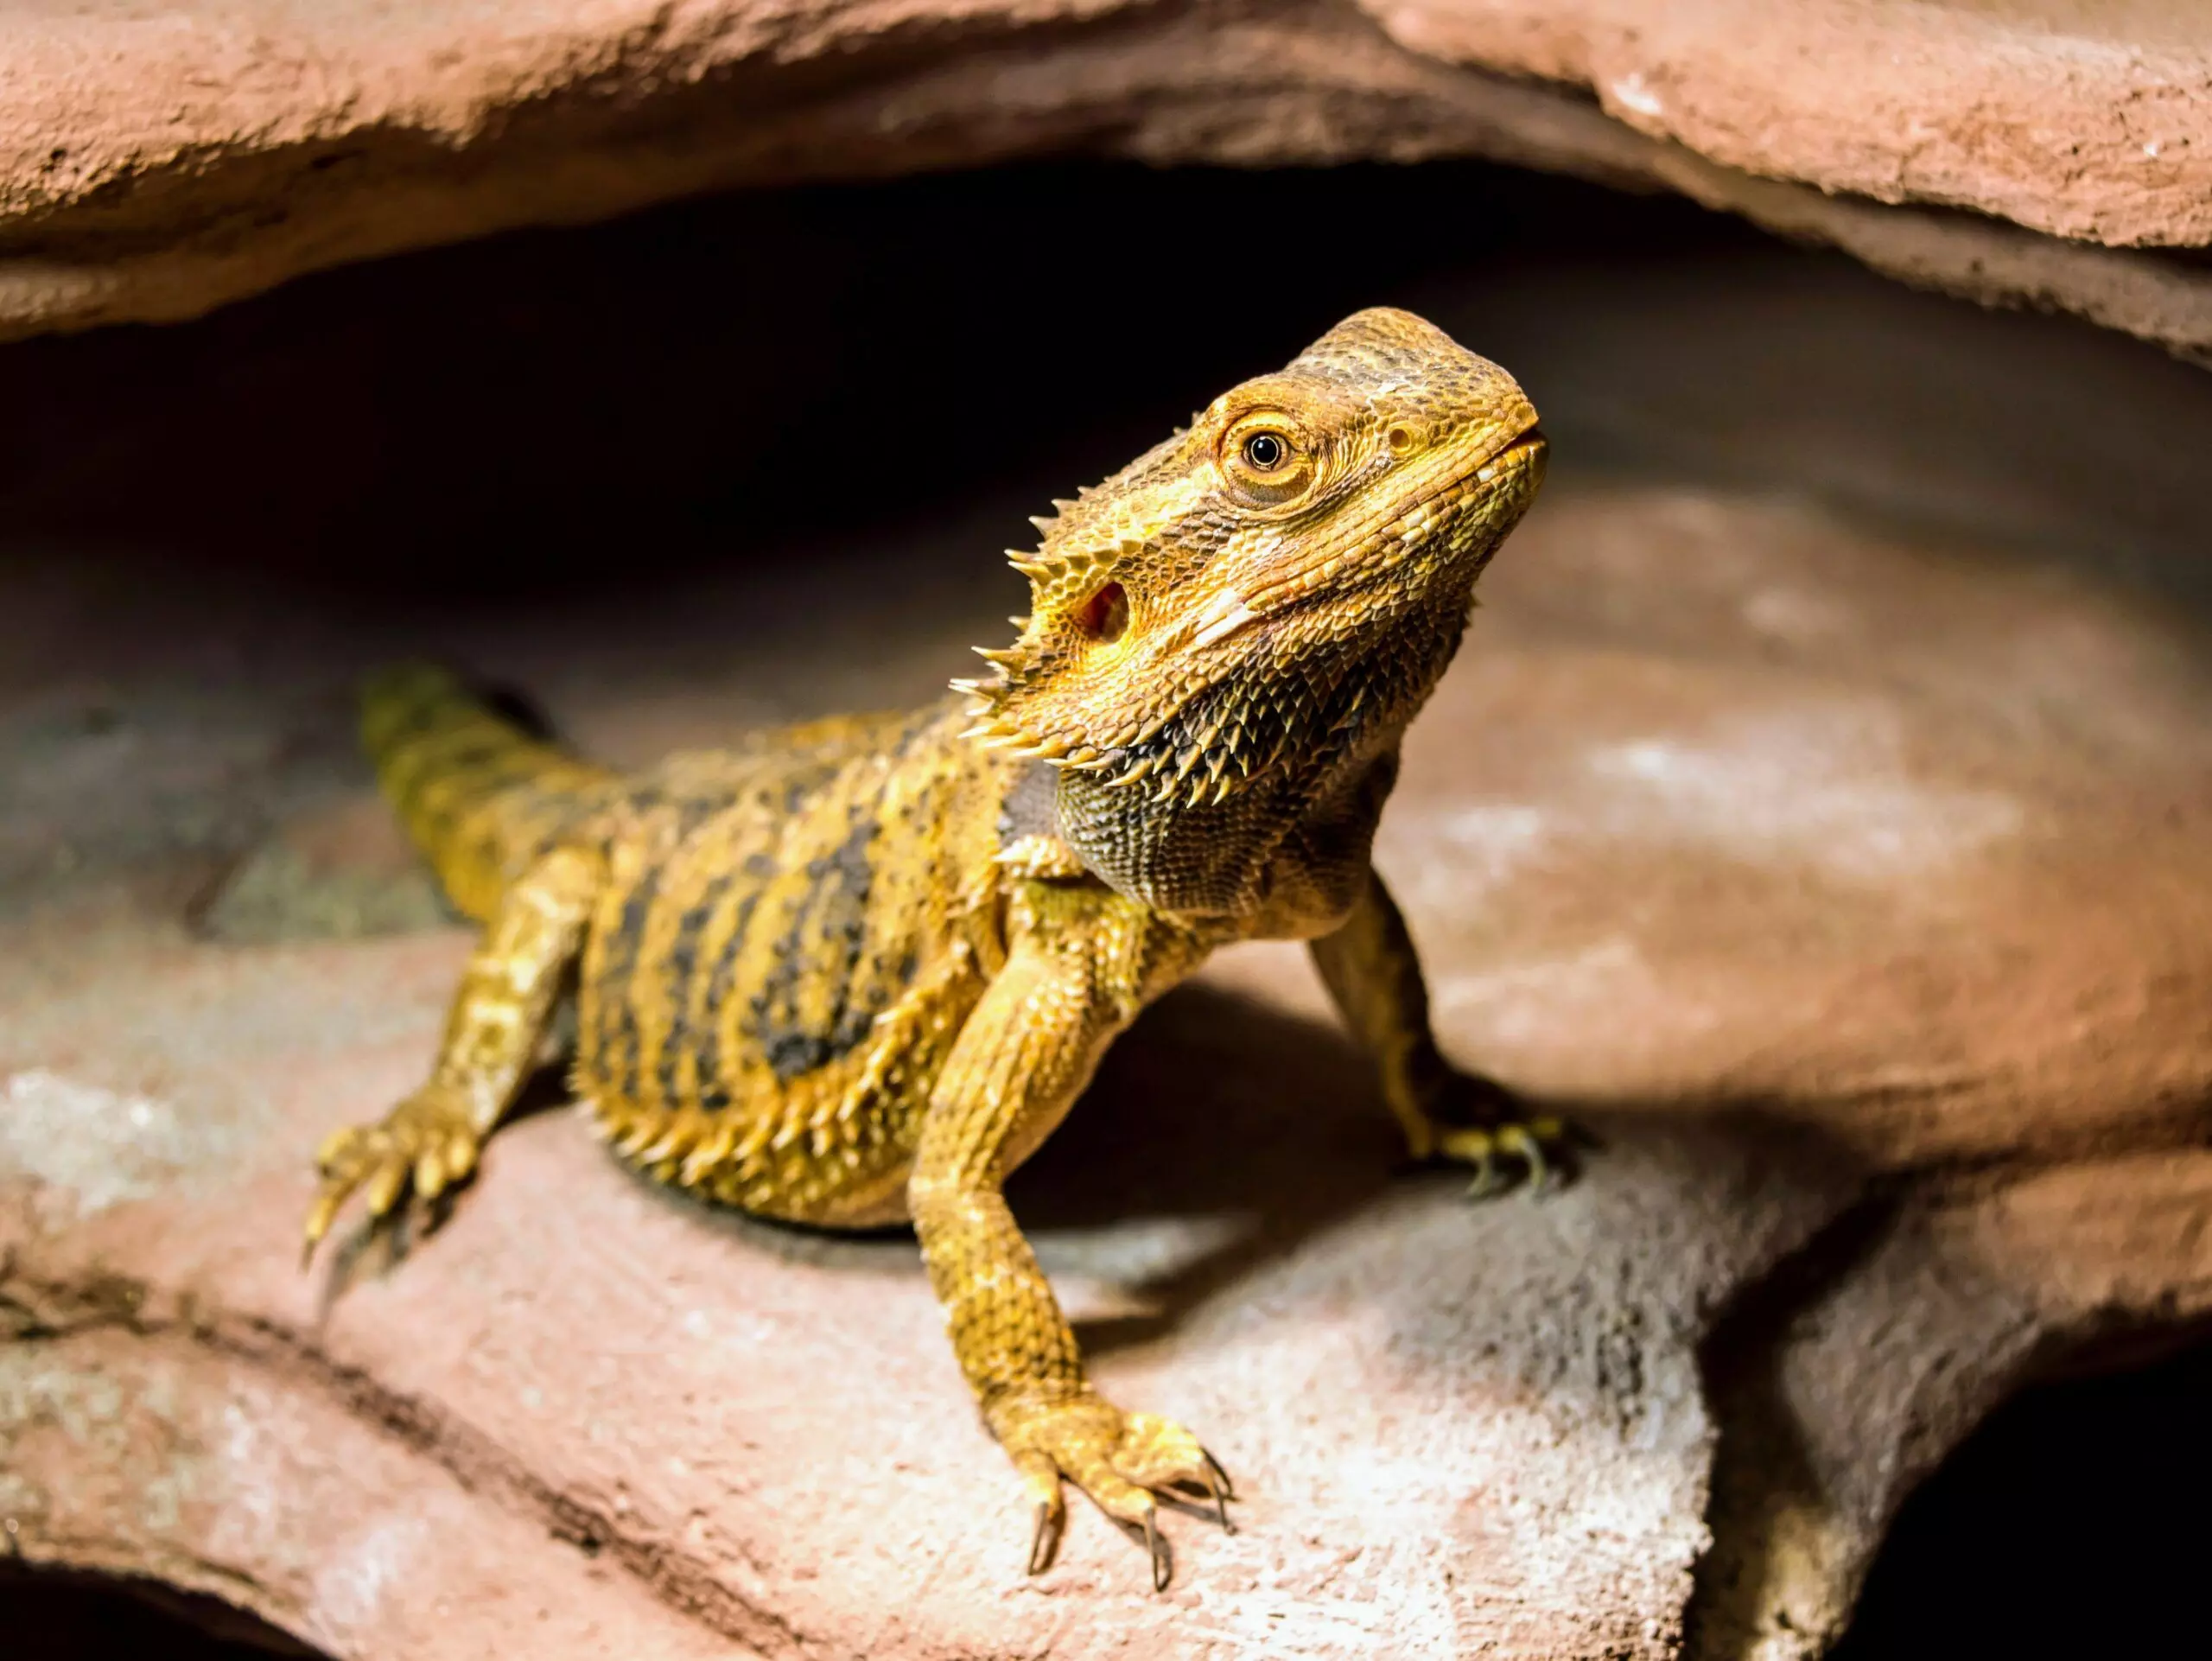 Evolution of reptiles linked to global warming: study